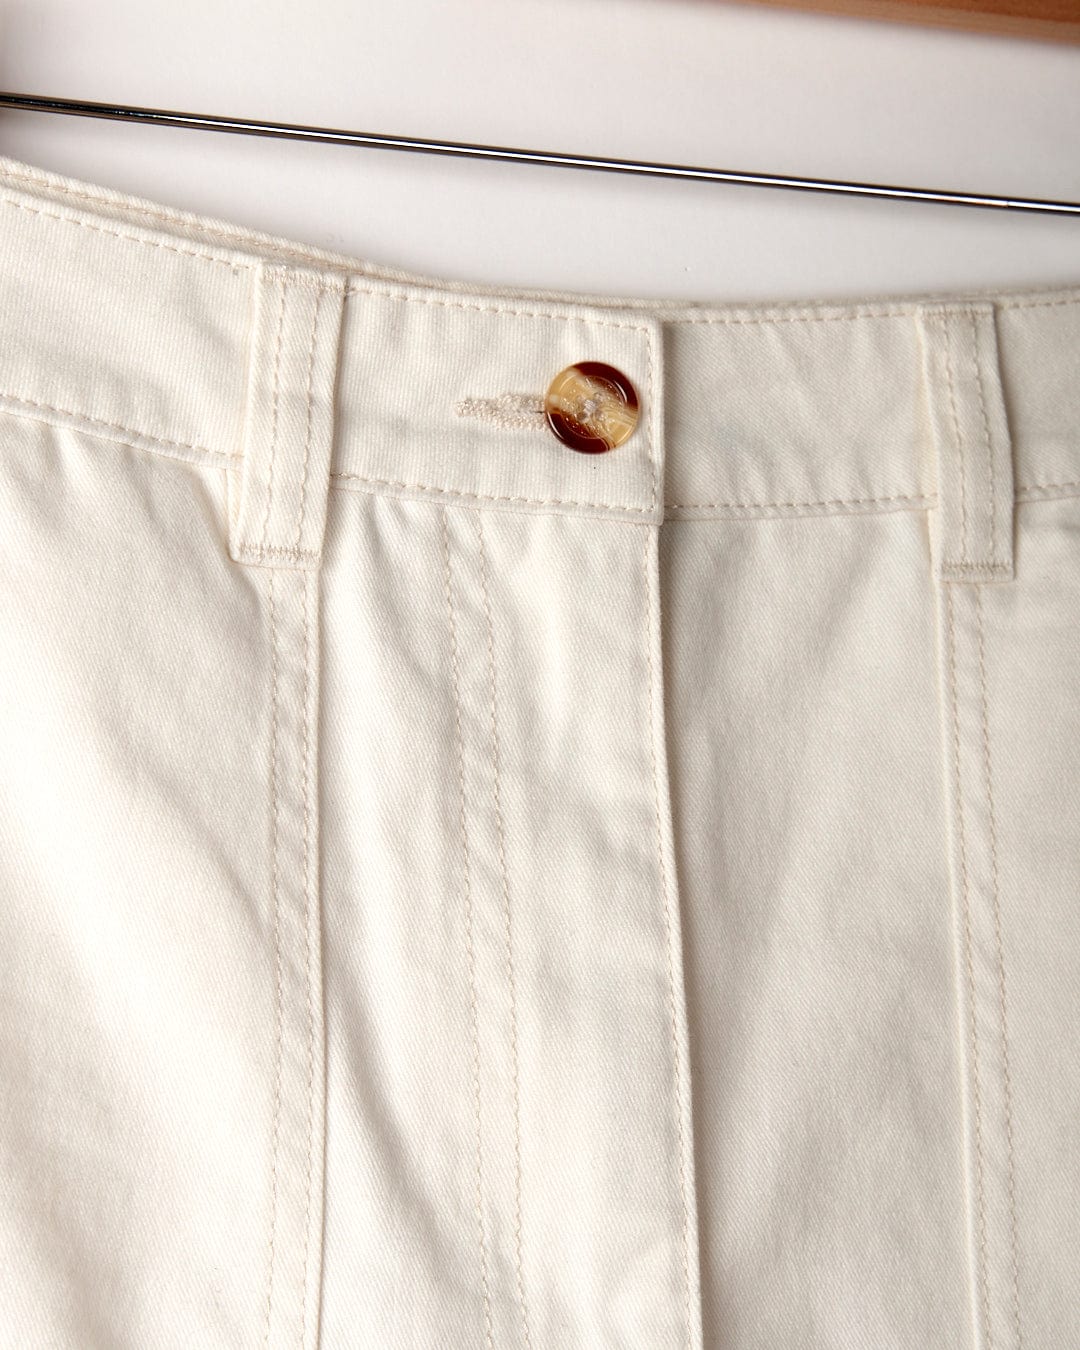 Close-up view of the waistband of a pair of Saltrock brand Liesl - Womens Chino Short - White, featuring a button closure and belt loops.